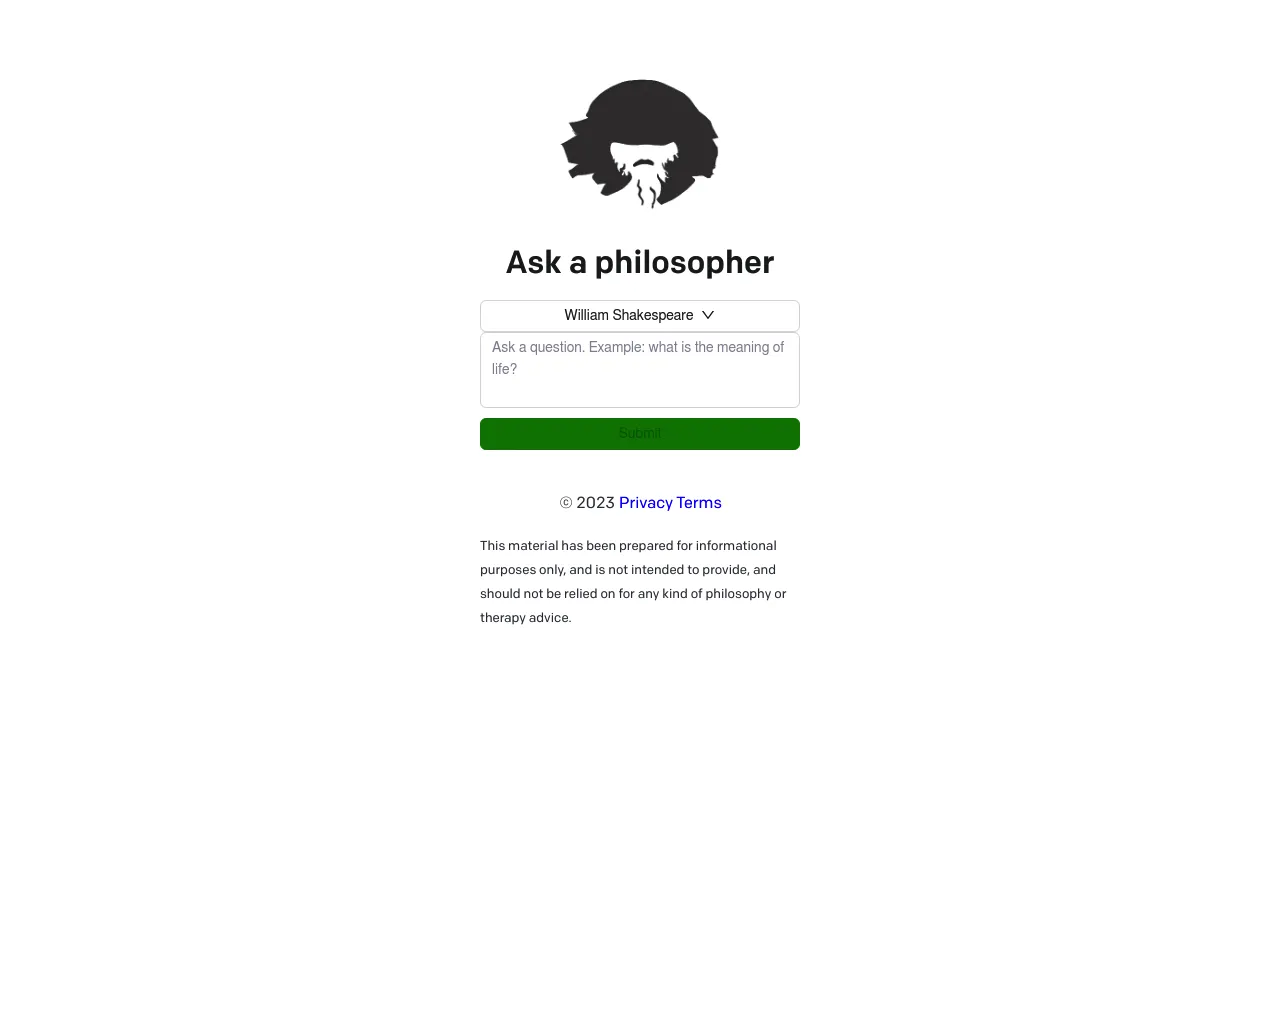 Ask a Philosopher